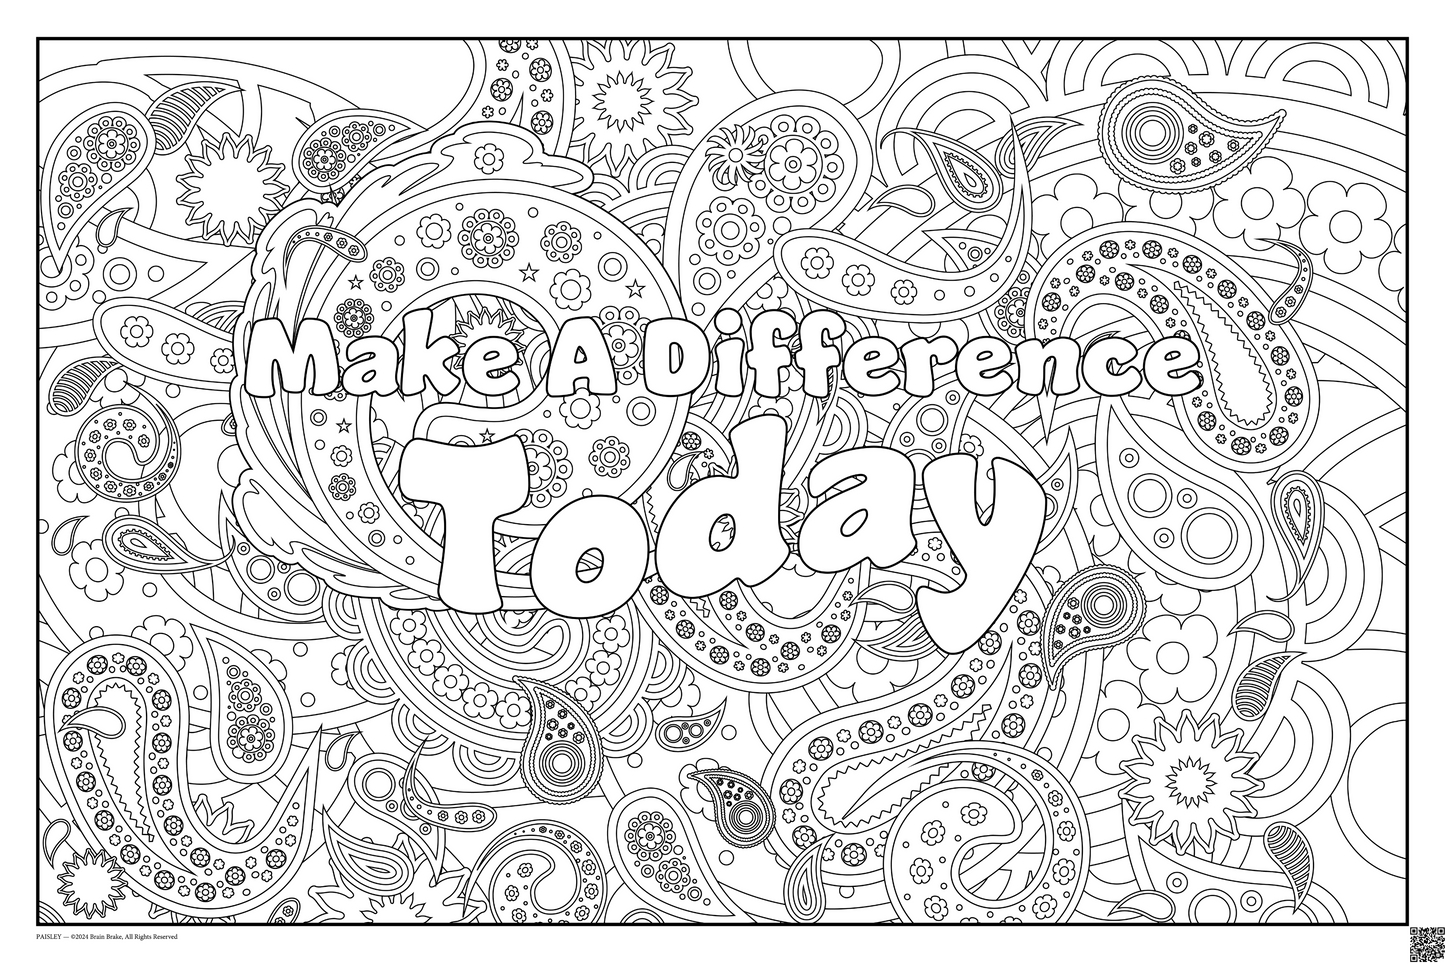 Build Community: Make A Difference Today